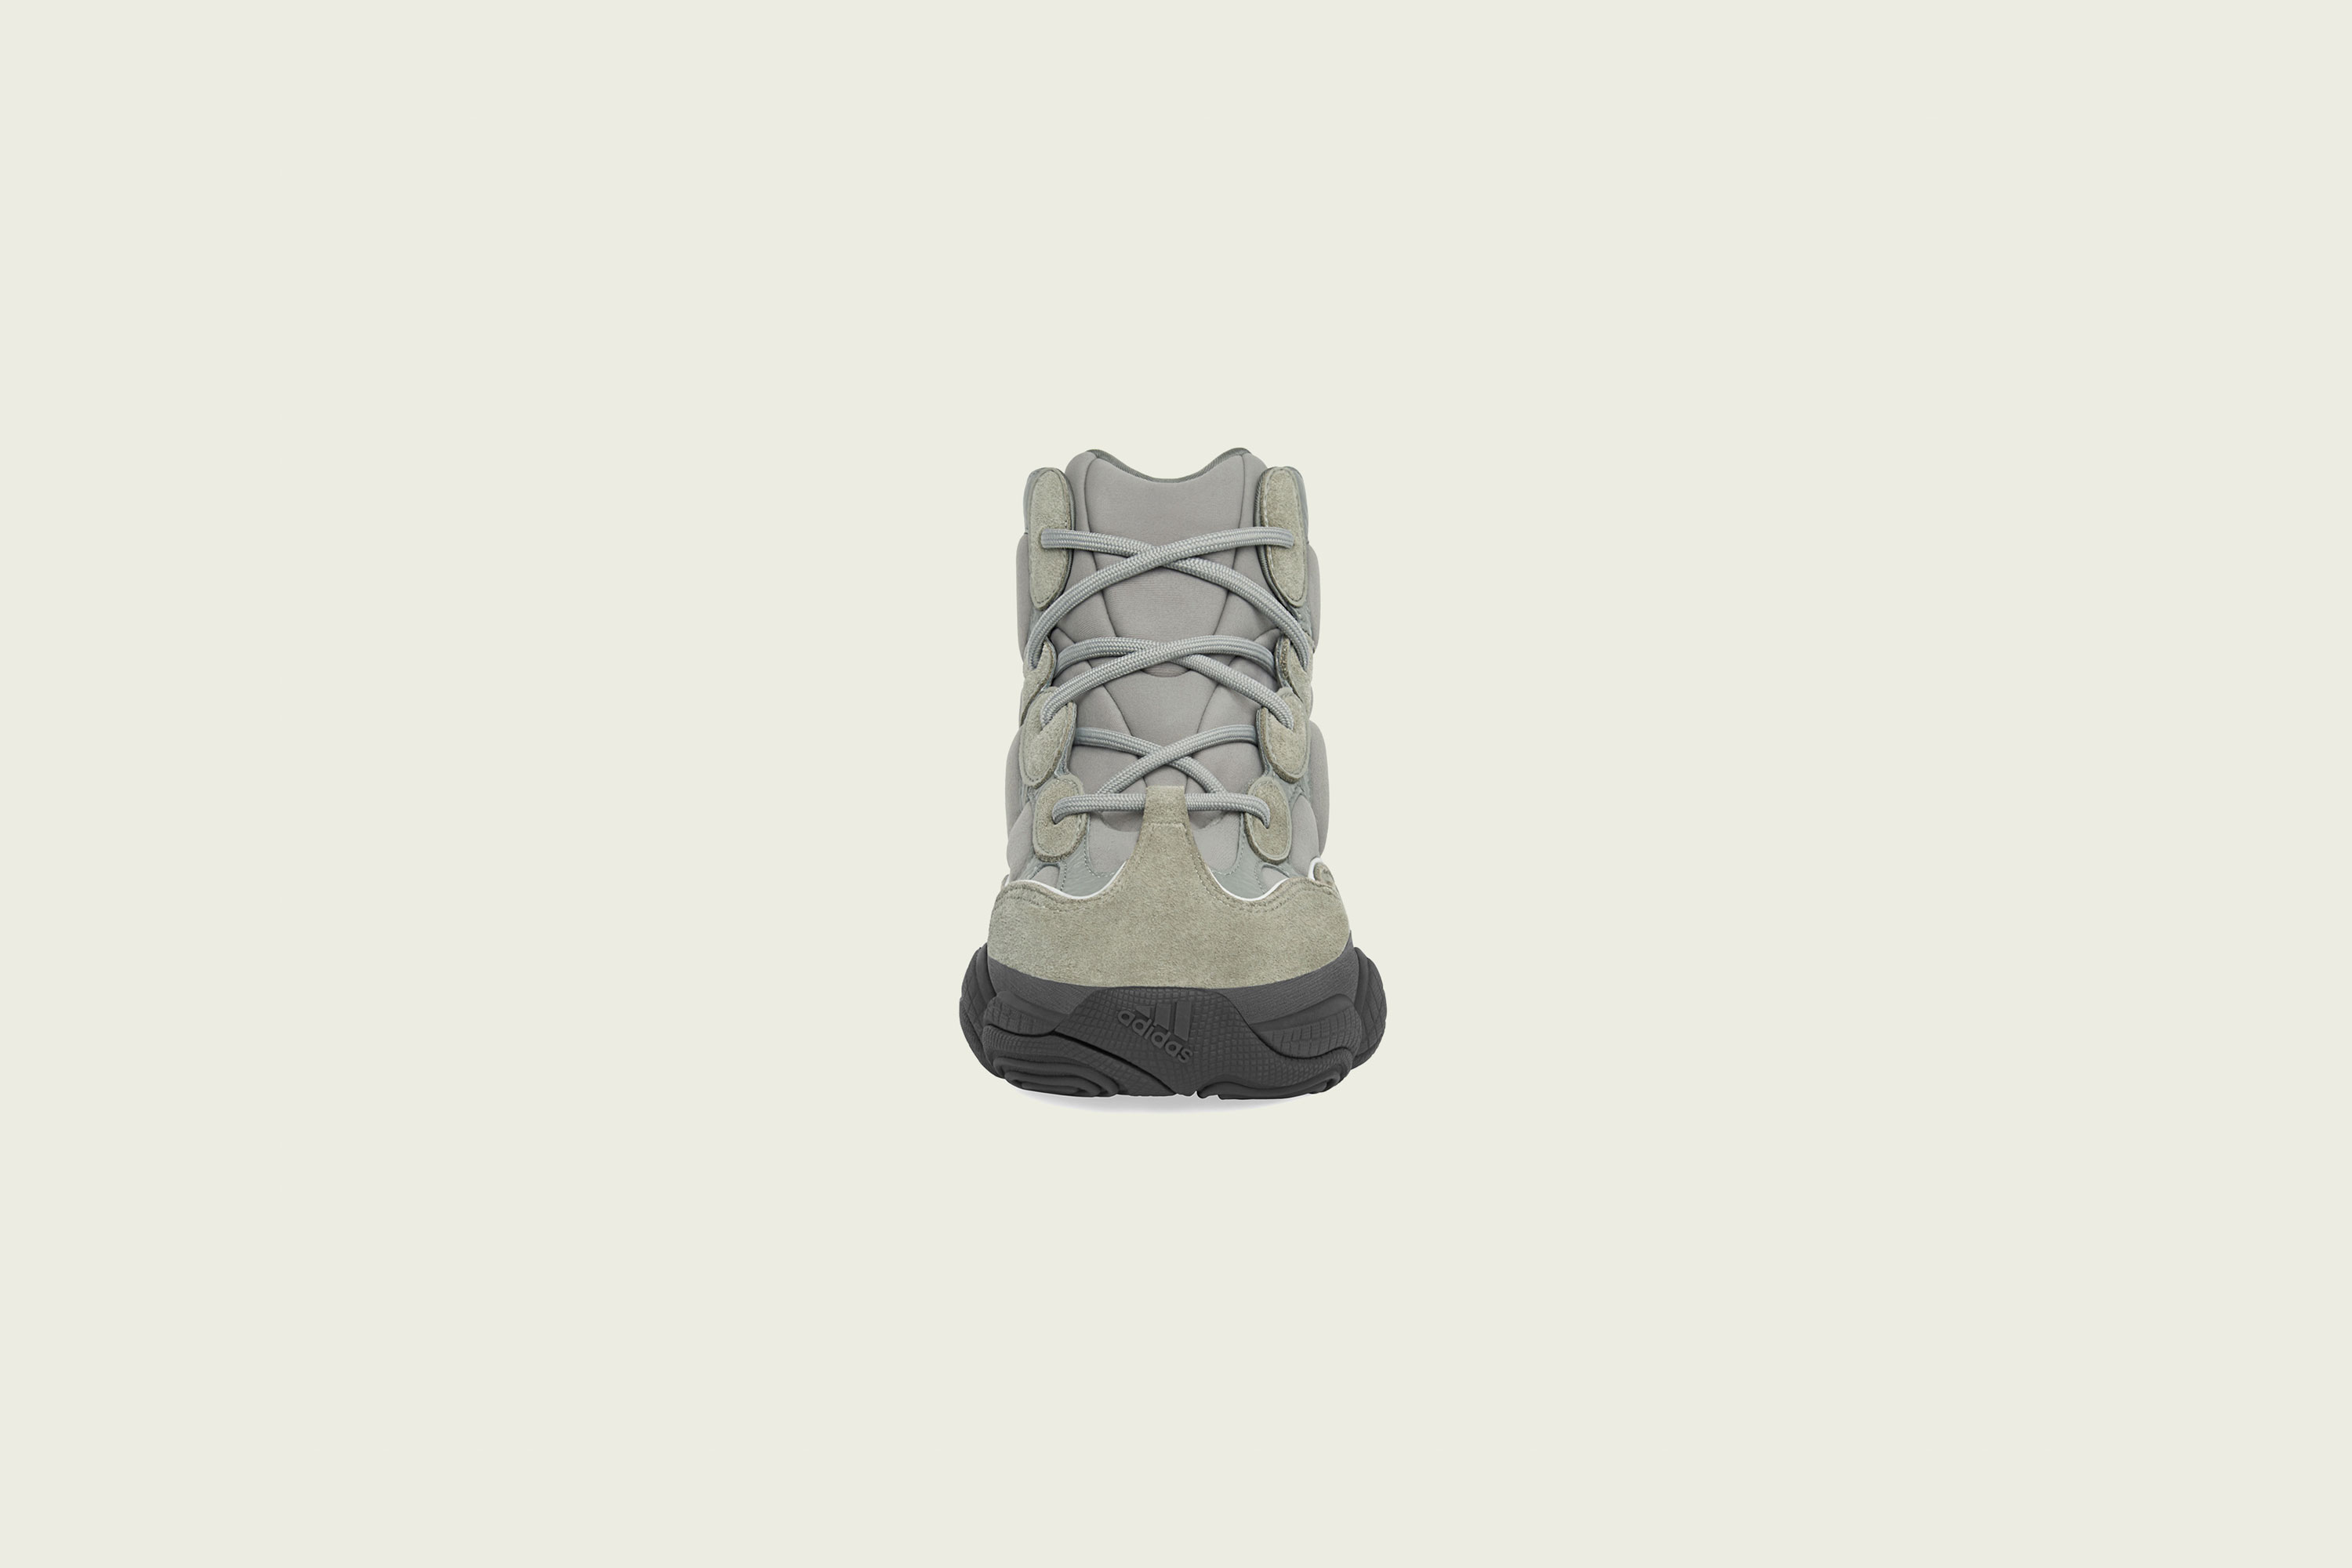 Up There Store - adidas Originals Kanye West Yeezy 500 High - Mist Slate